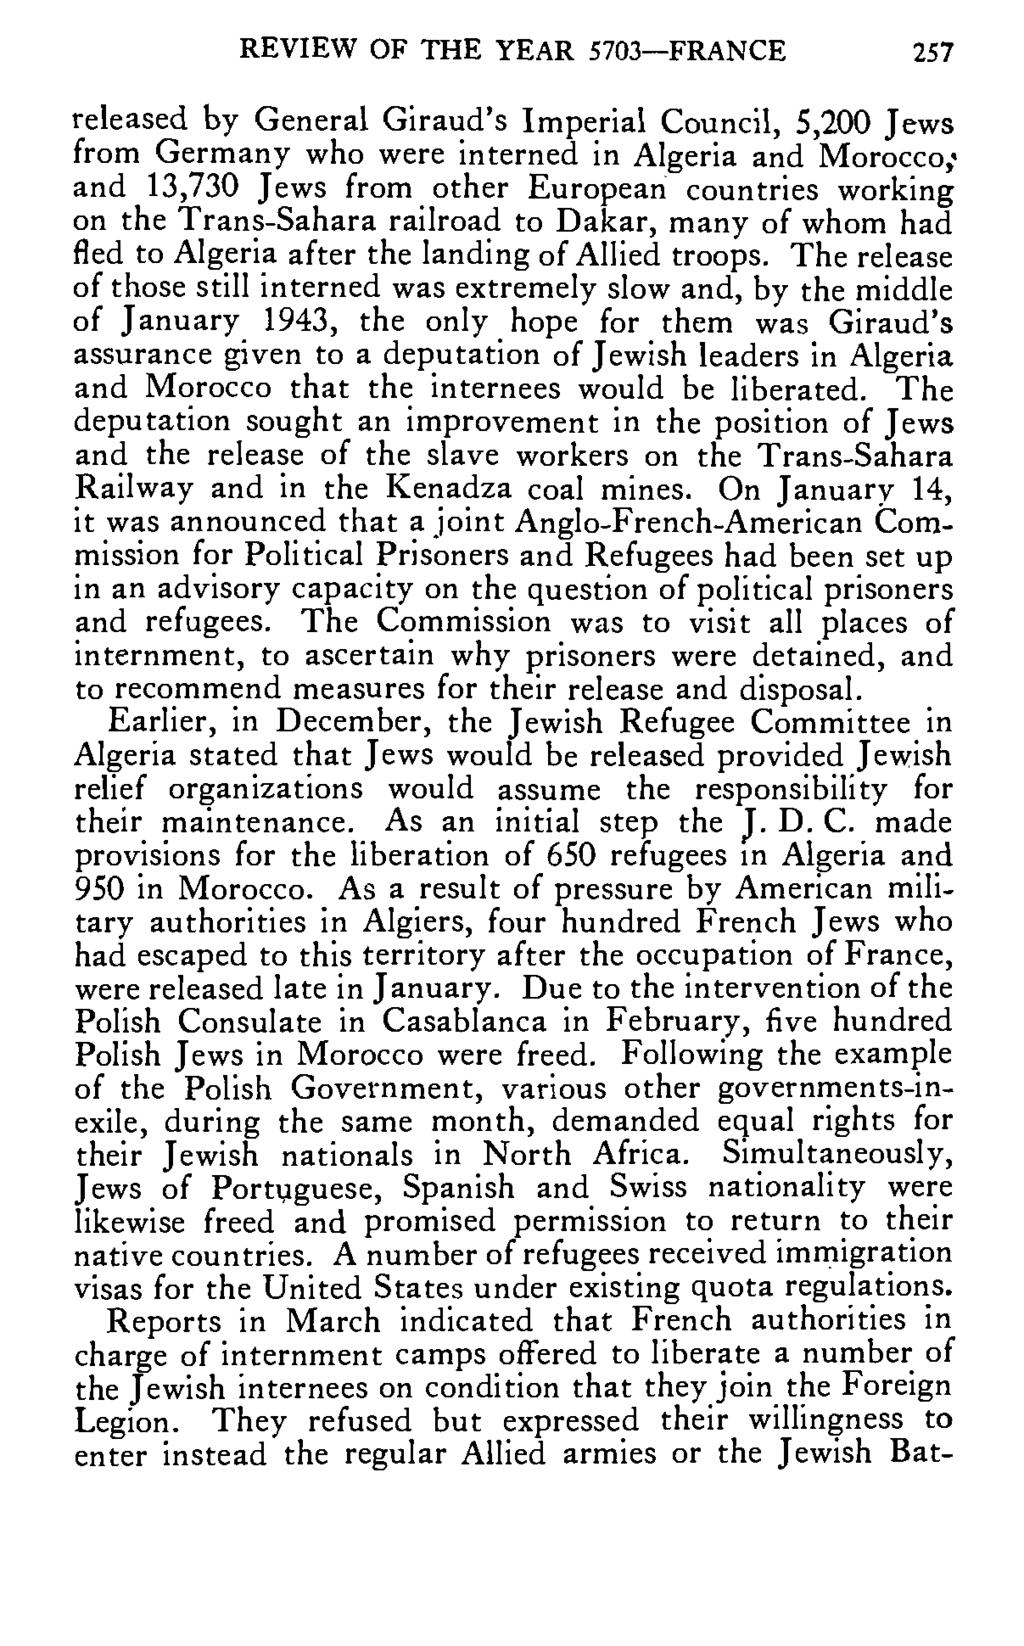 REVIEW OF THE YEAR 5703 FRANCE 257 released by General Giraud's Imperial Council, 5,200 Jews from Germany who were interned in Algeria and Morocco,' and 13,730 Jews from other European countries